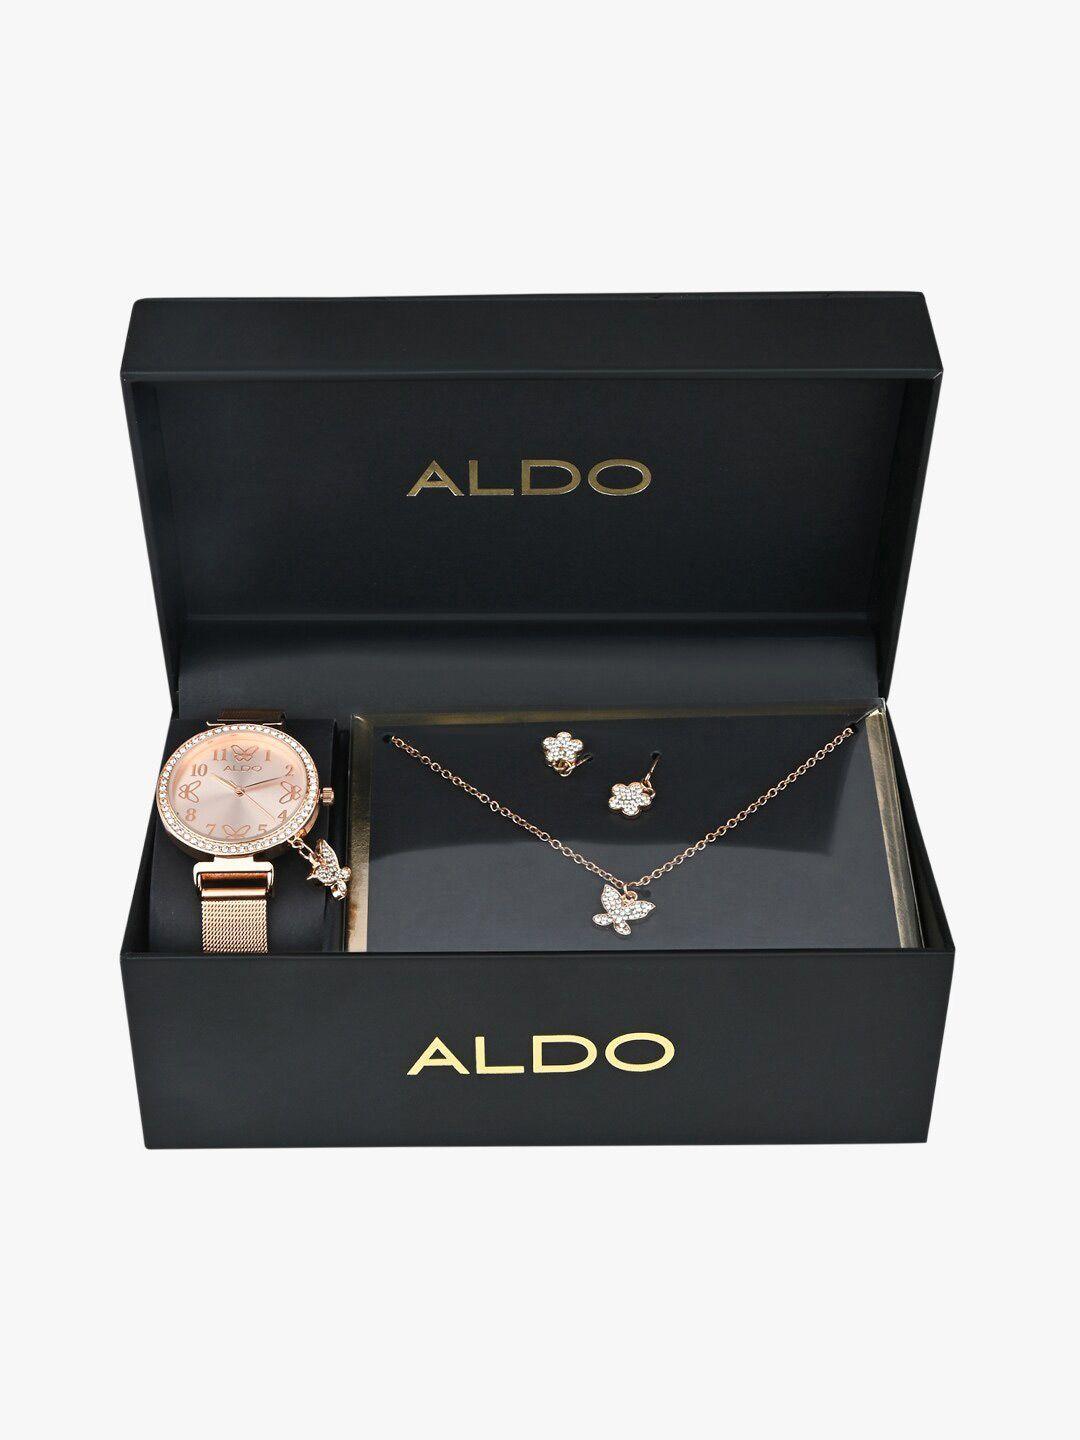 aldo-women-embellished-dial-watch-gift-set-abilith653